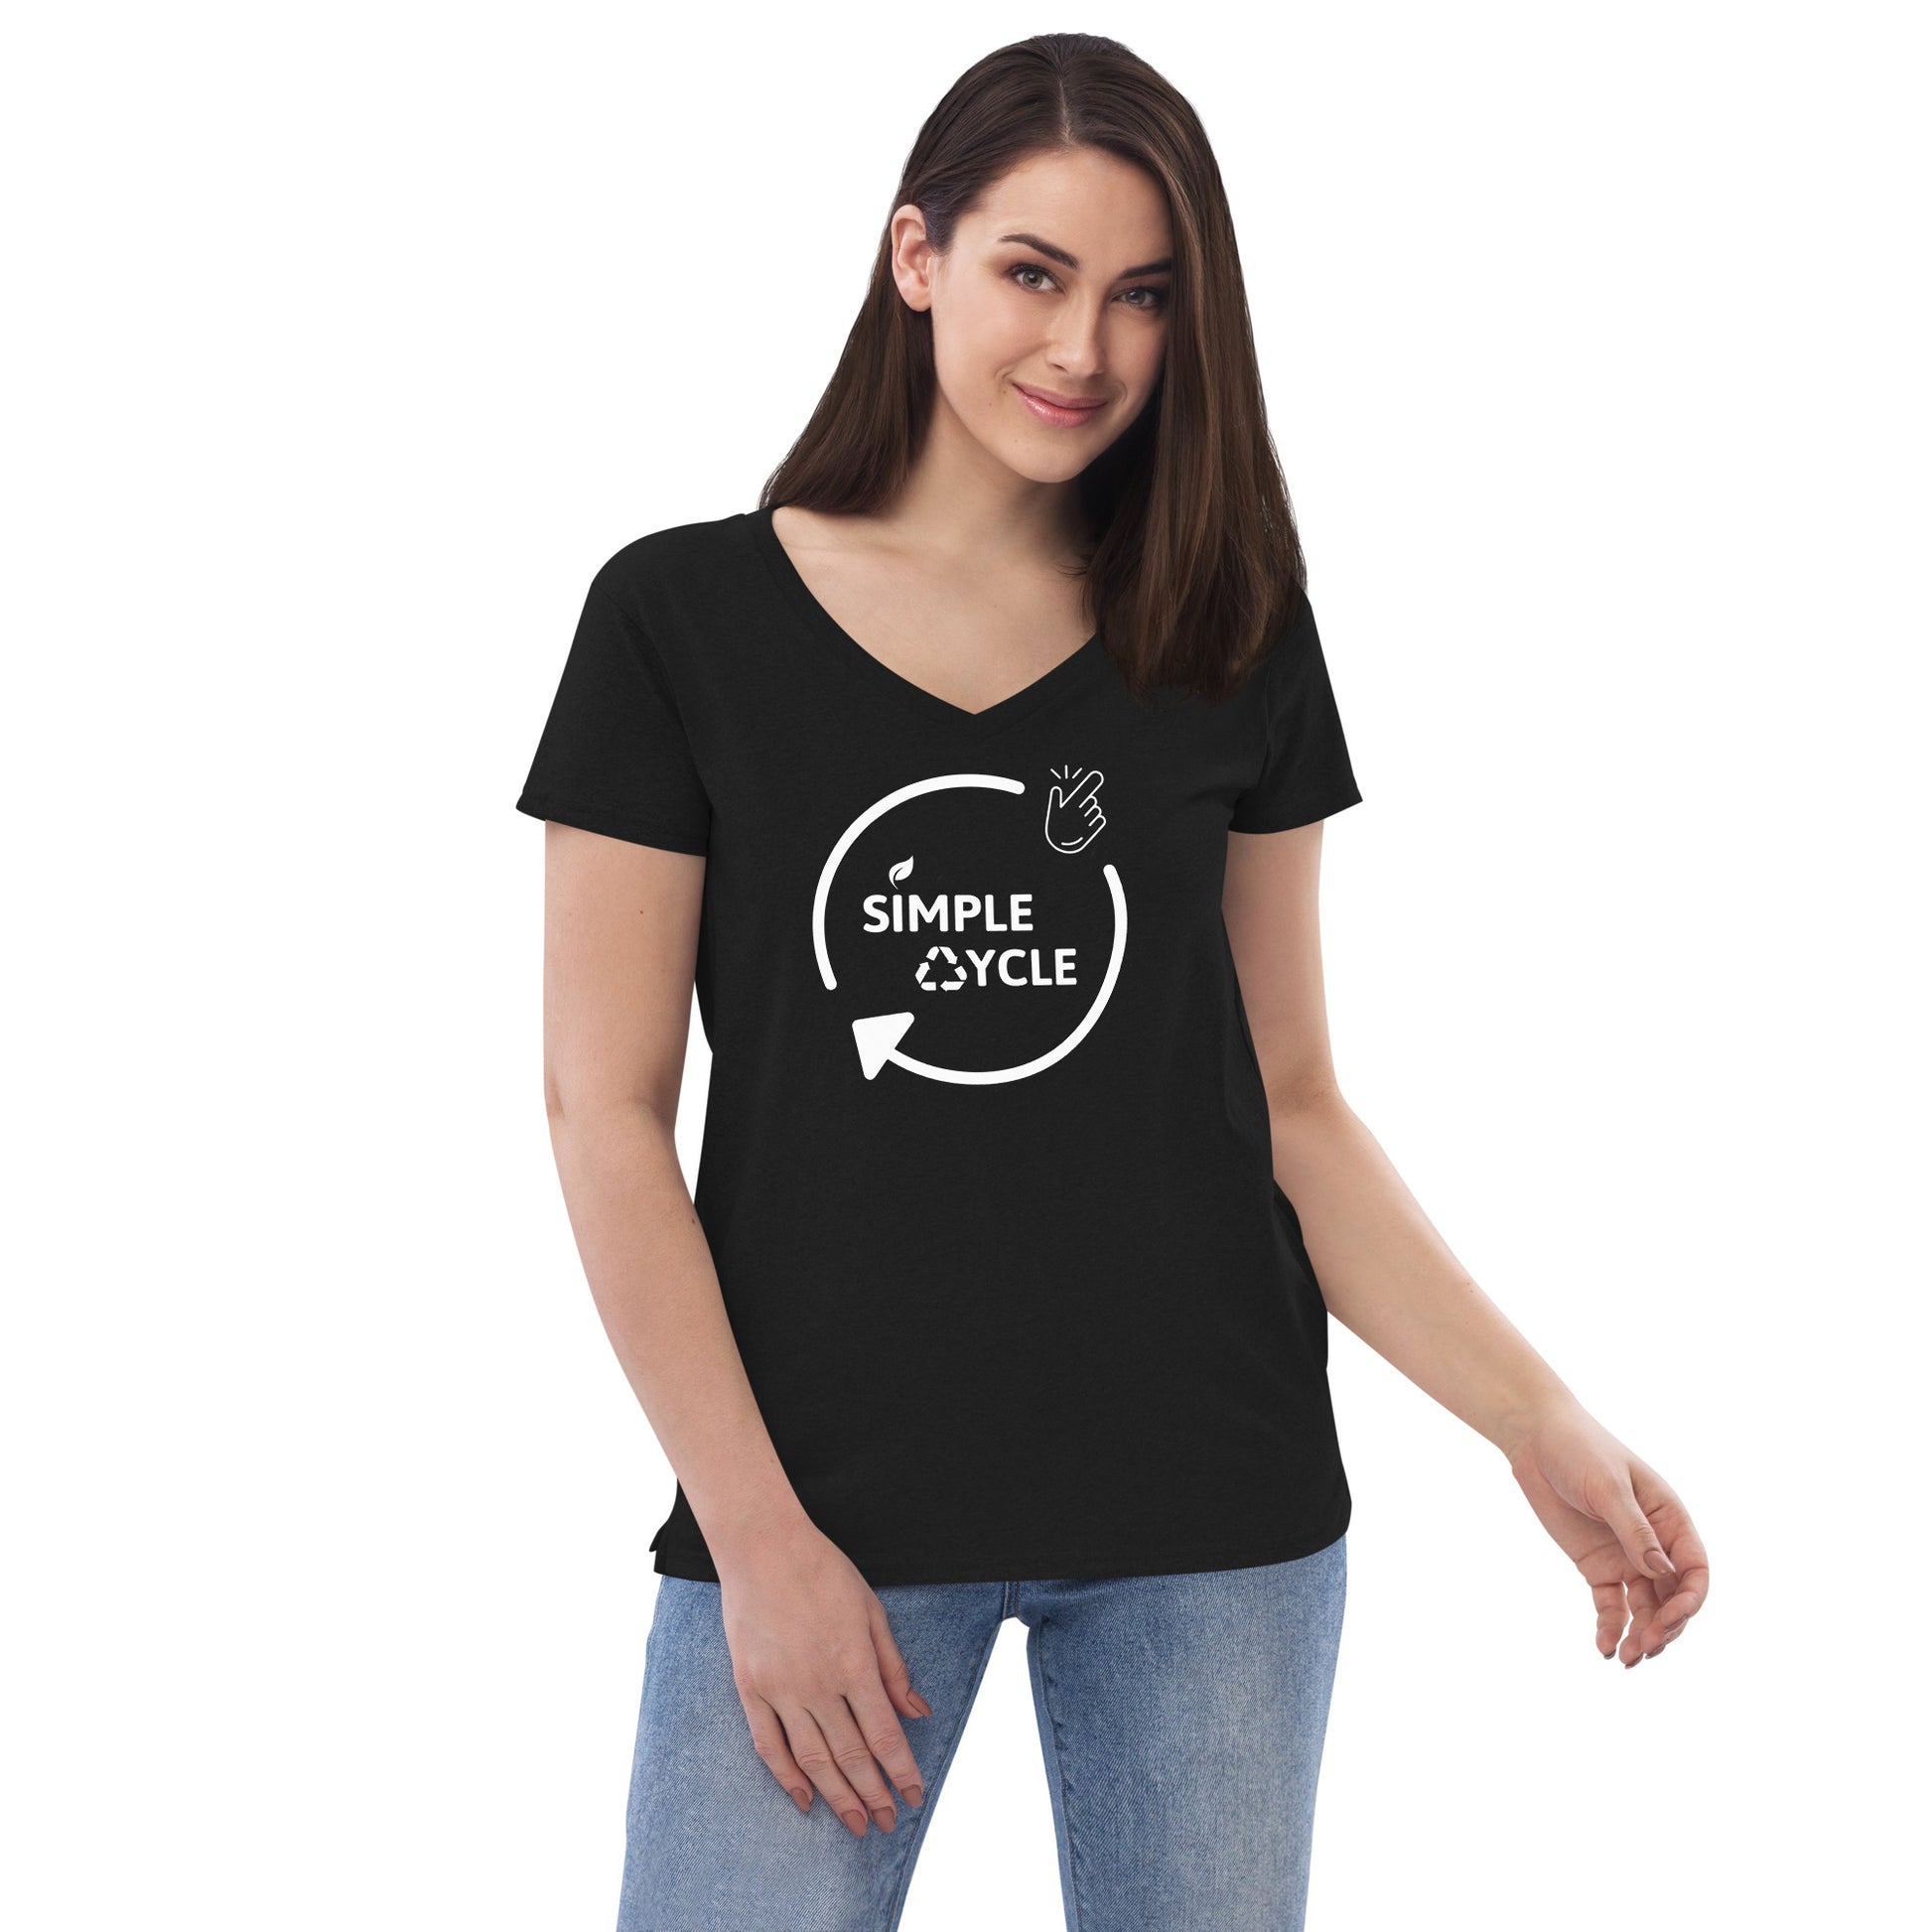 SimpleCycle Women’s Recycled V-Neck T-Shirt black front view